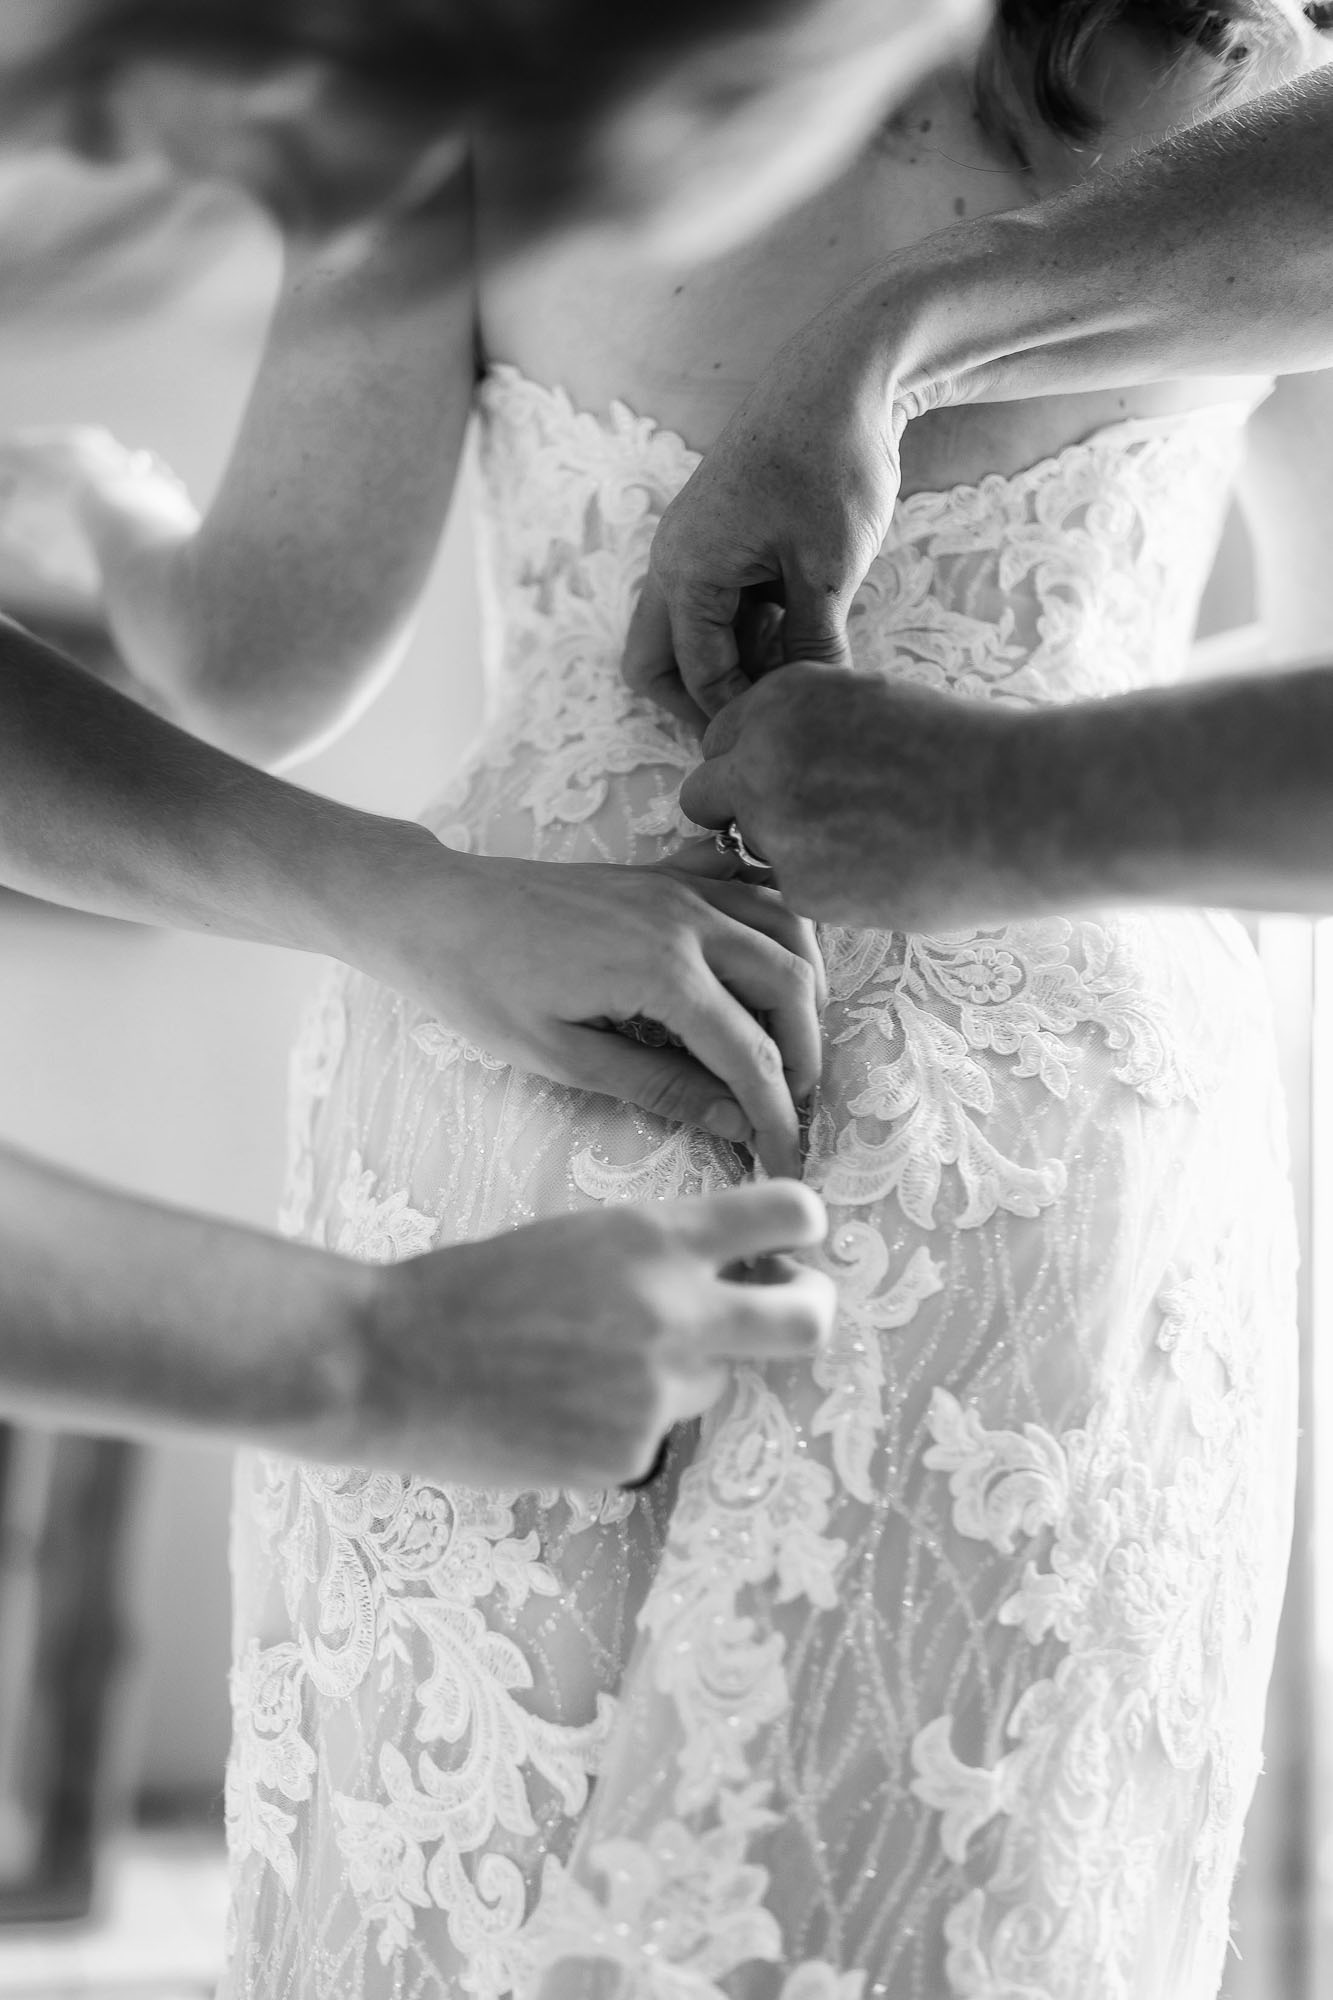 buttoning up the bride's dress